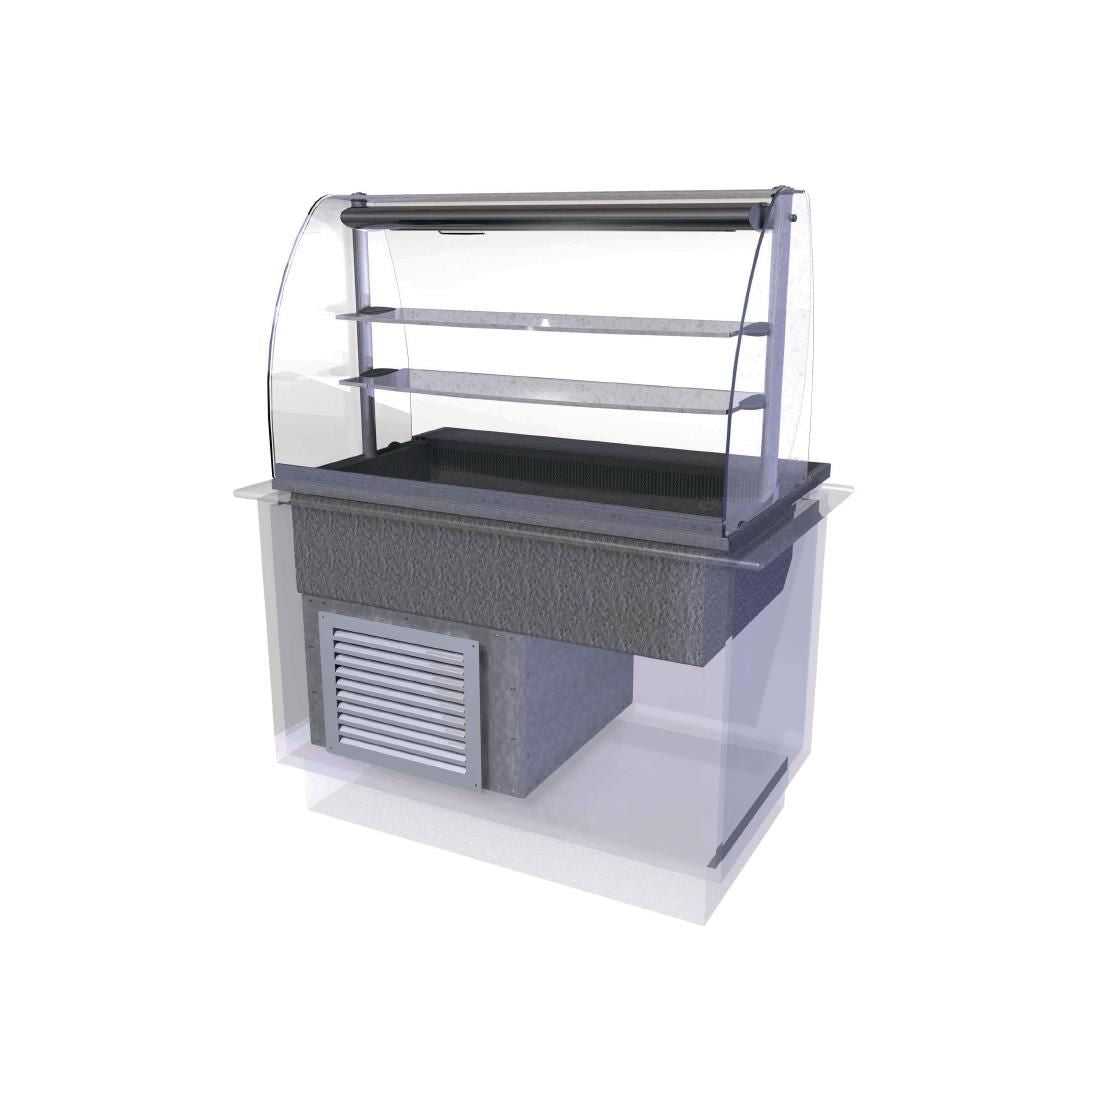 CW609 Designline Cold Multi Level Deli Assisted Service 1175mm JD Catering Equipment Solutions Ltd